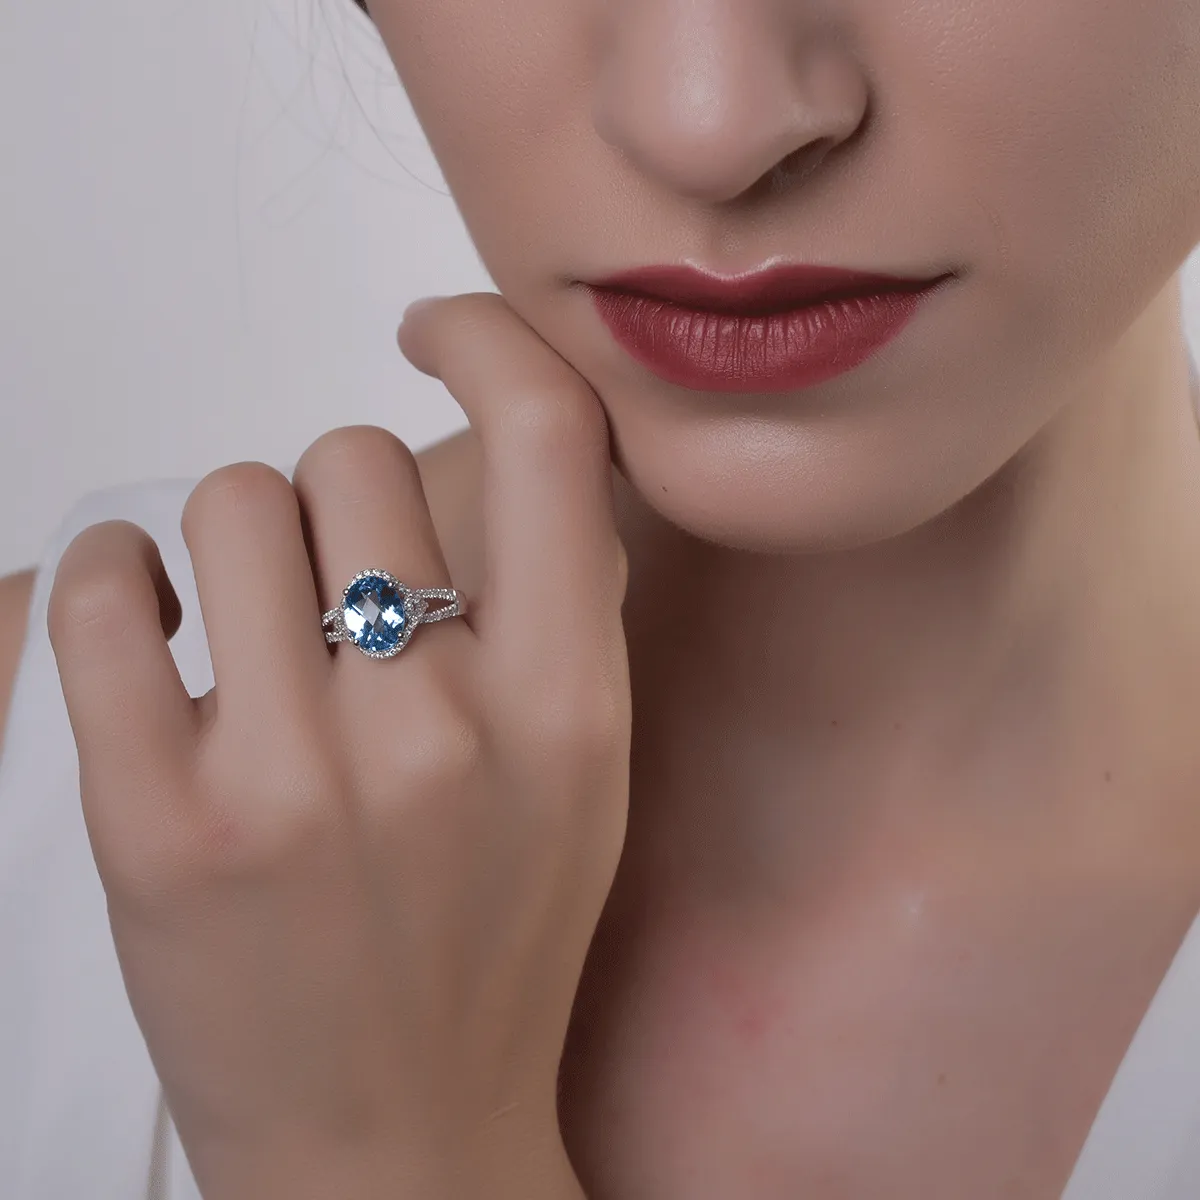 18K white gold ring with 3ct blue topaz and 0.38ct diamonds